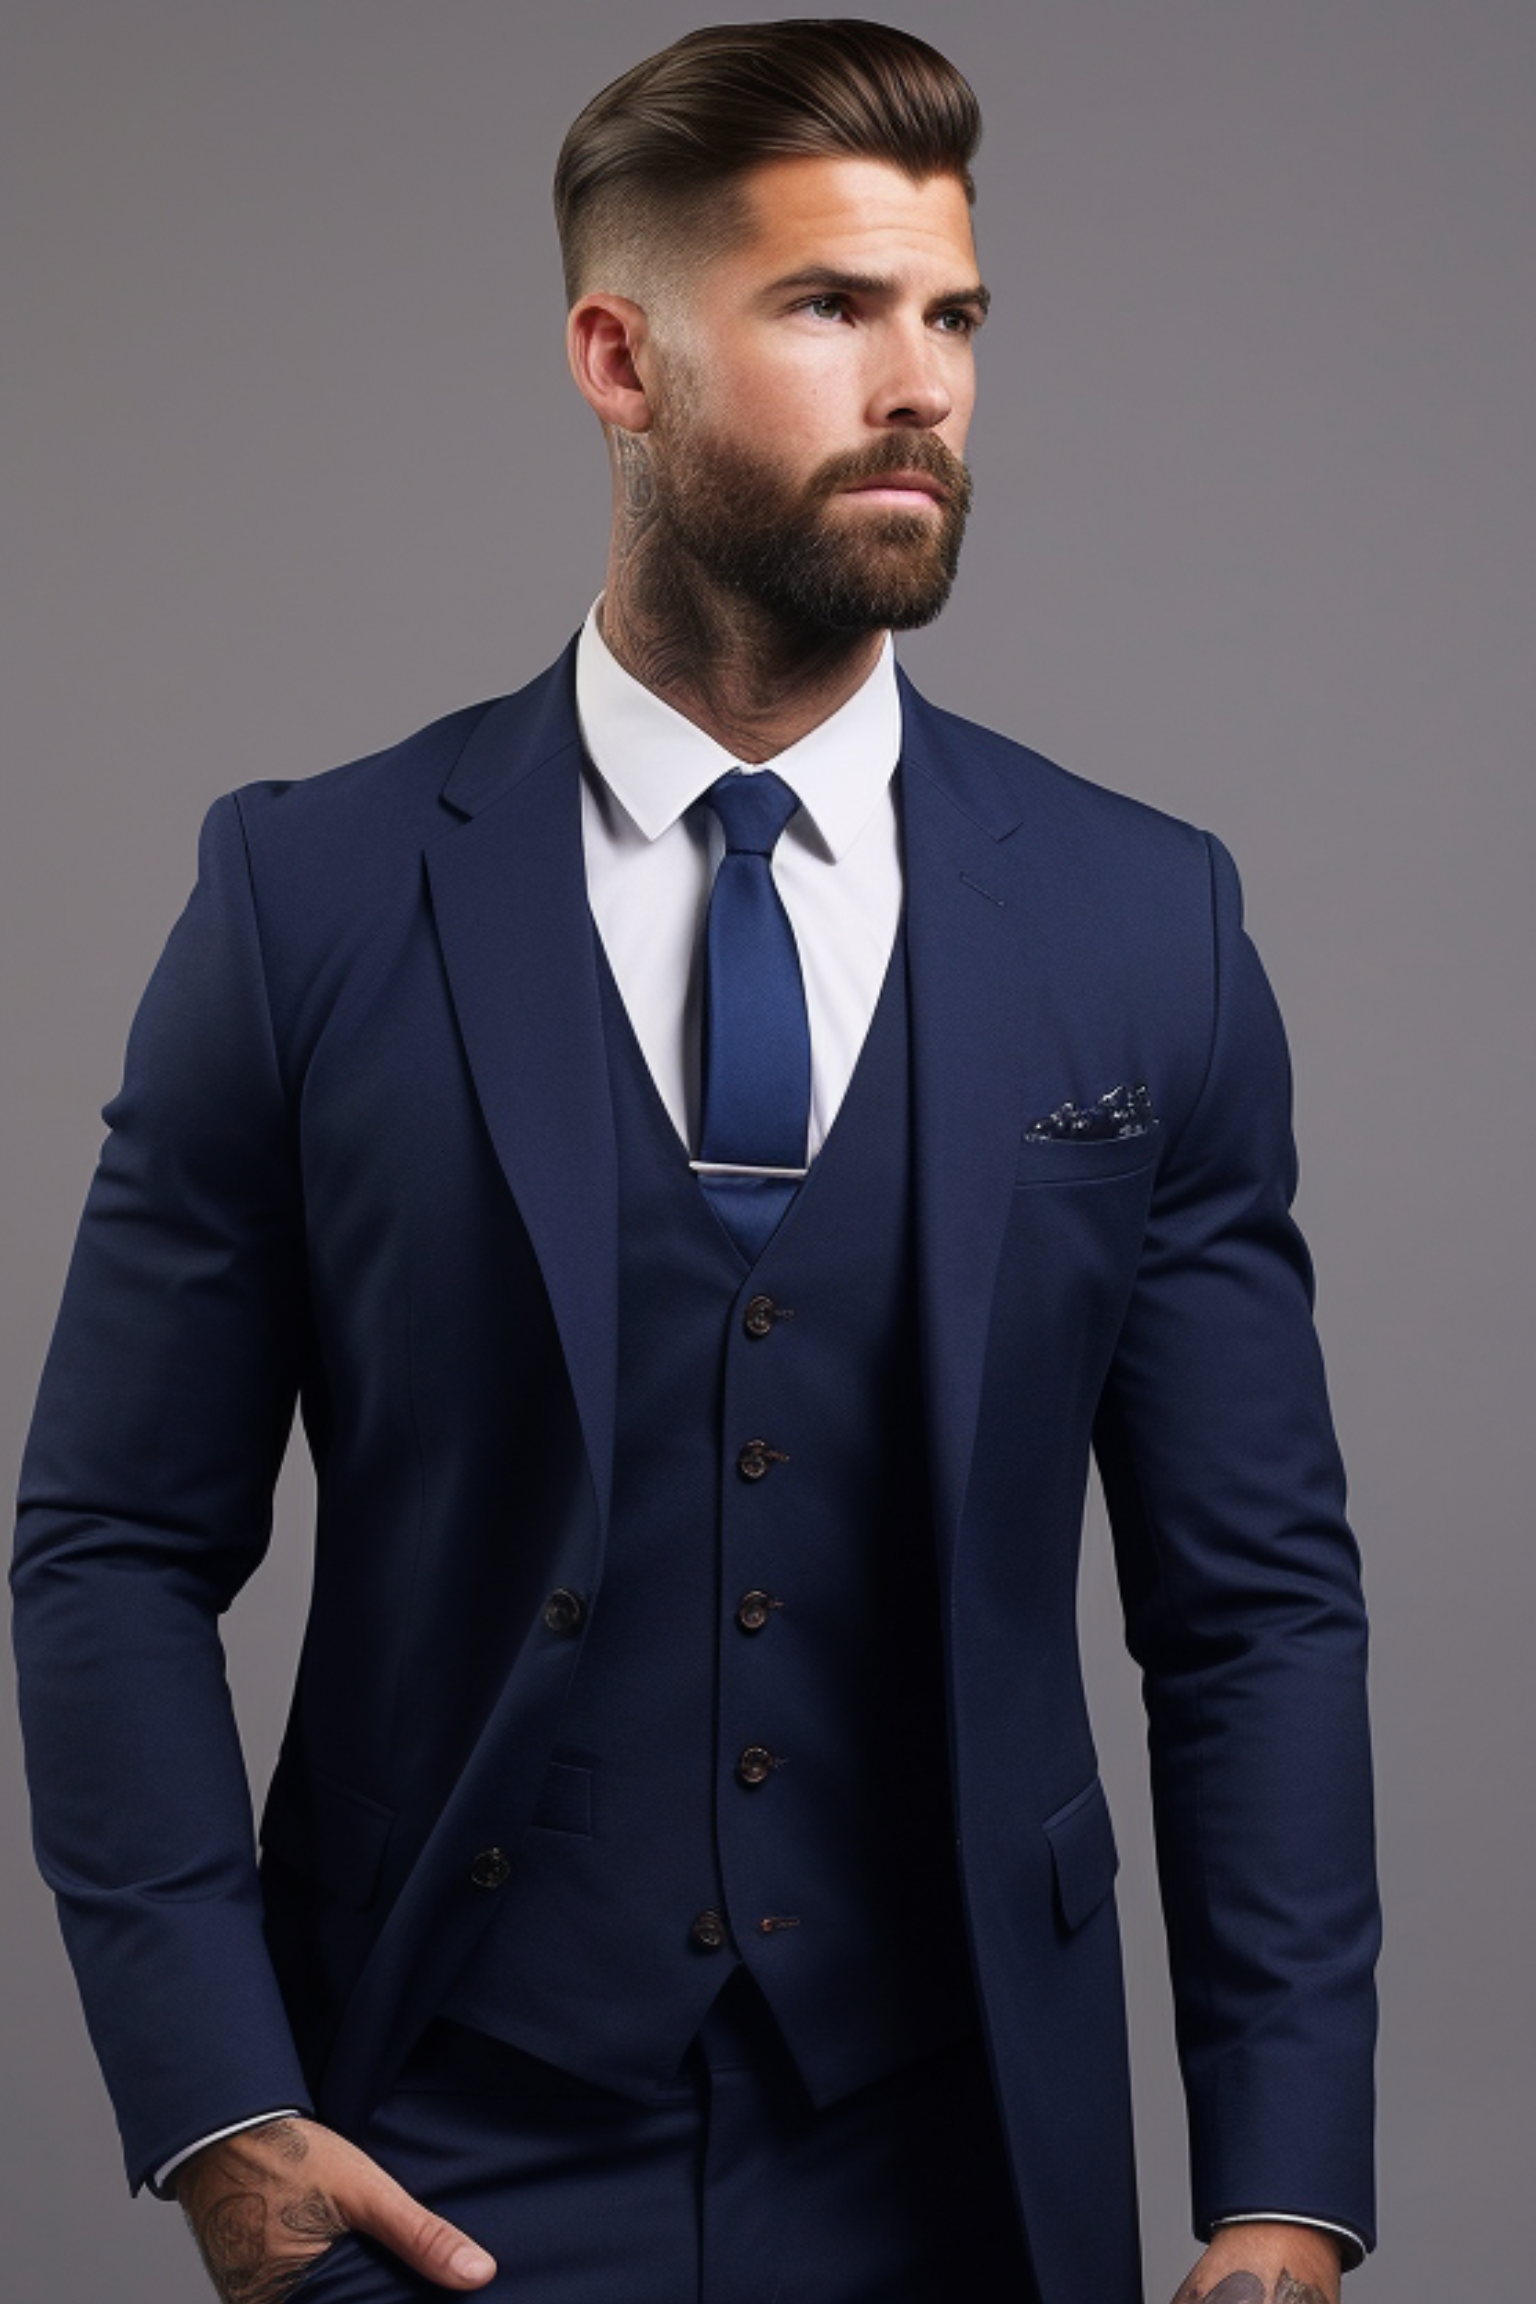 Can I wear a blue suit to a formal? - Quora